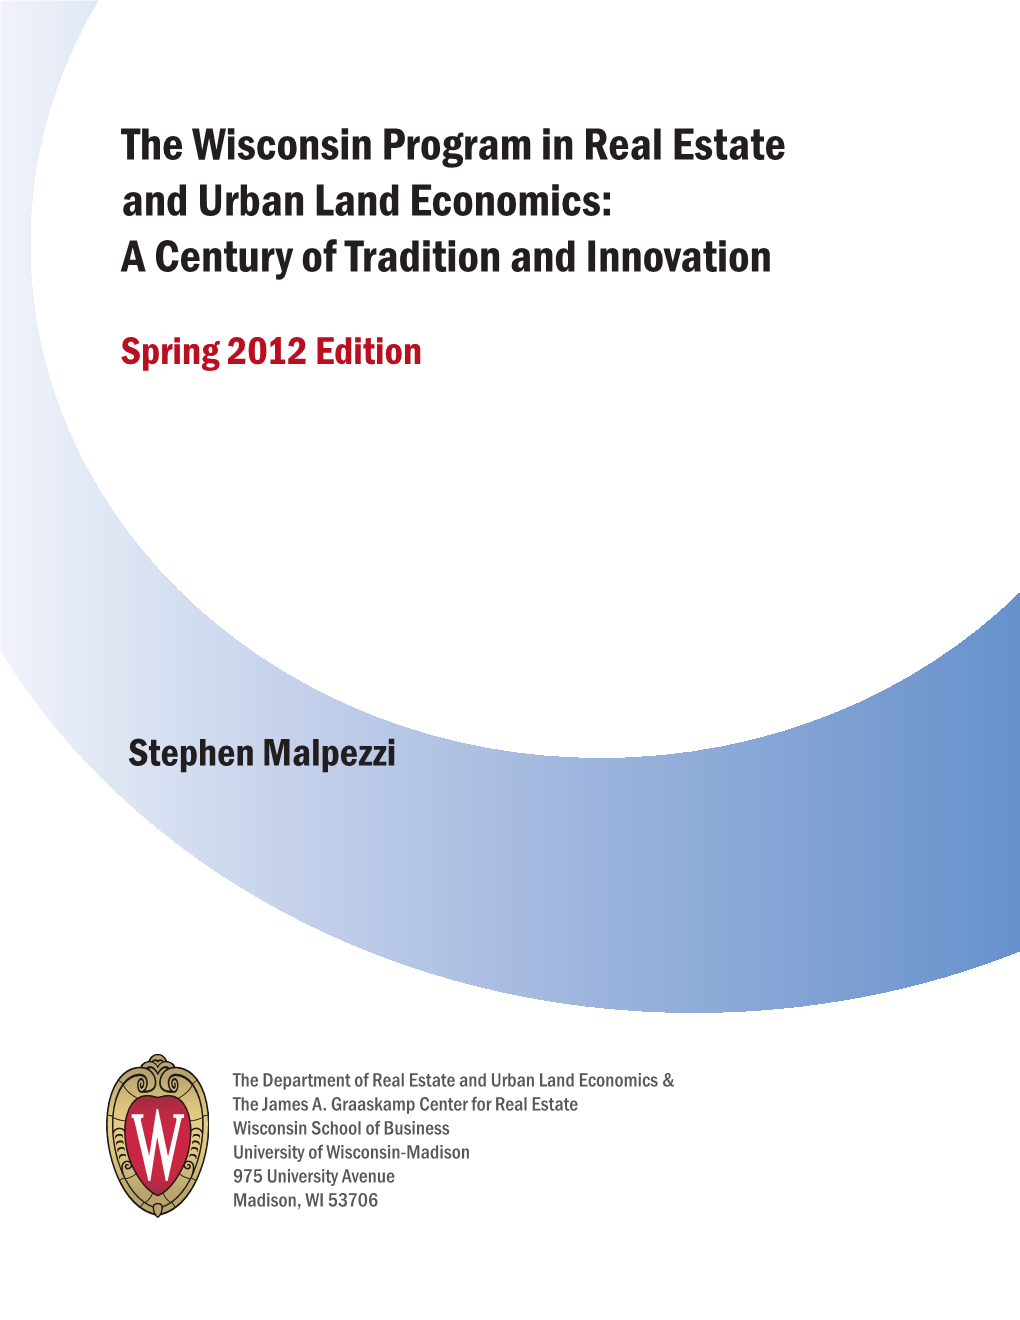 The Wisconsin Program in Real Estate and Urban Land Economics: a Century of Tradition and Innovation